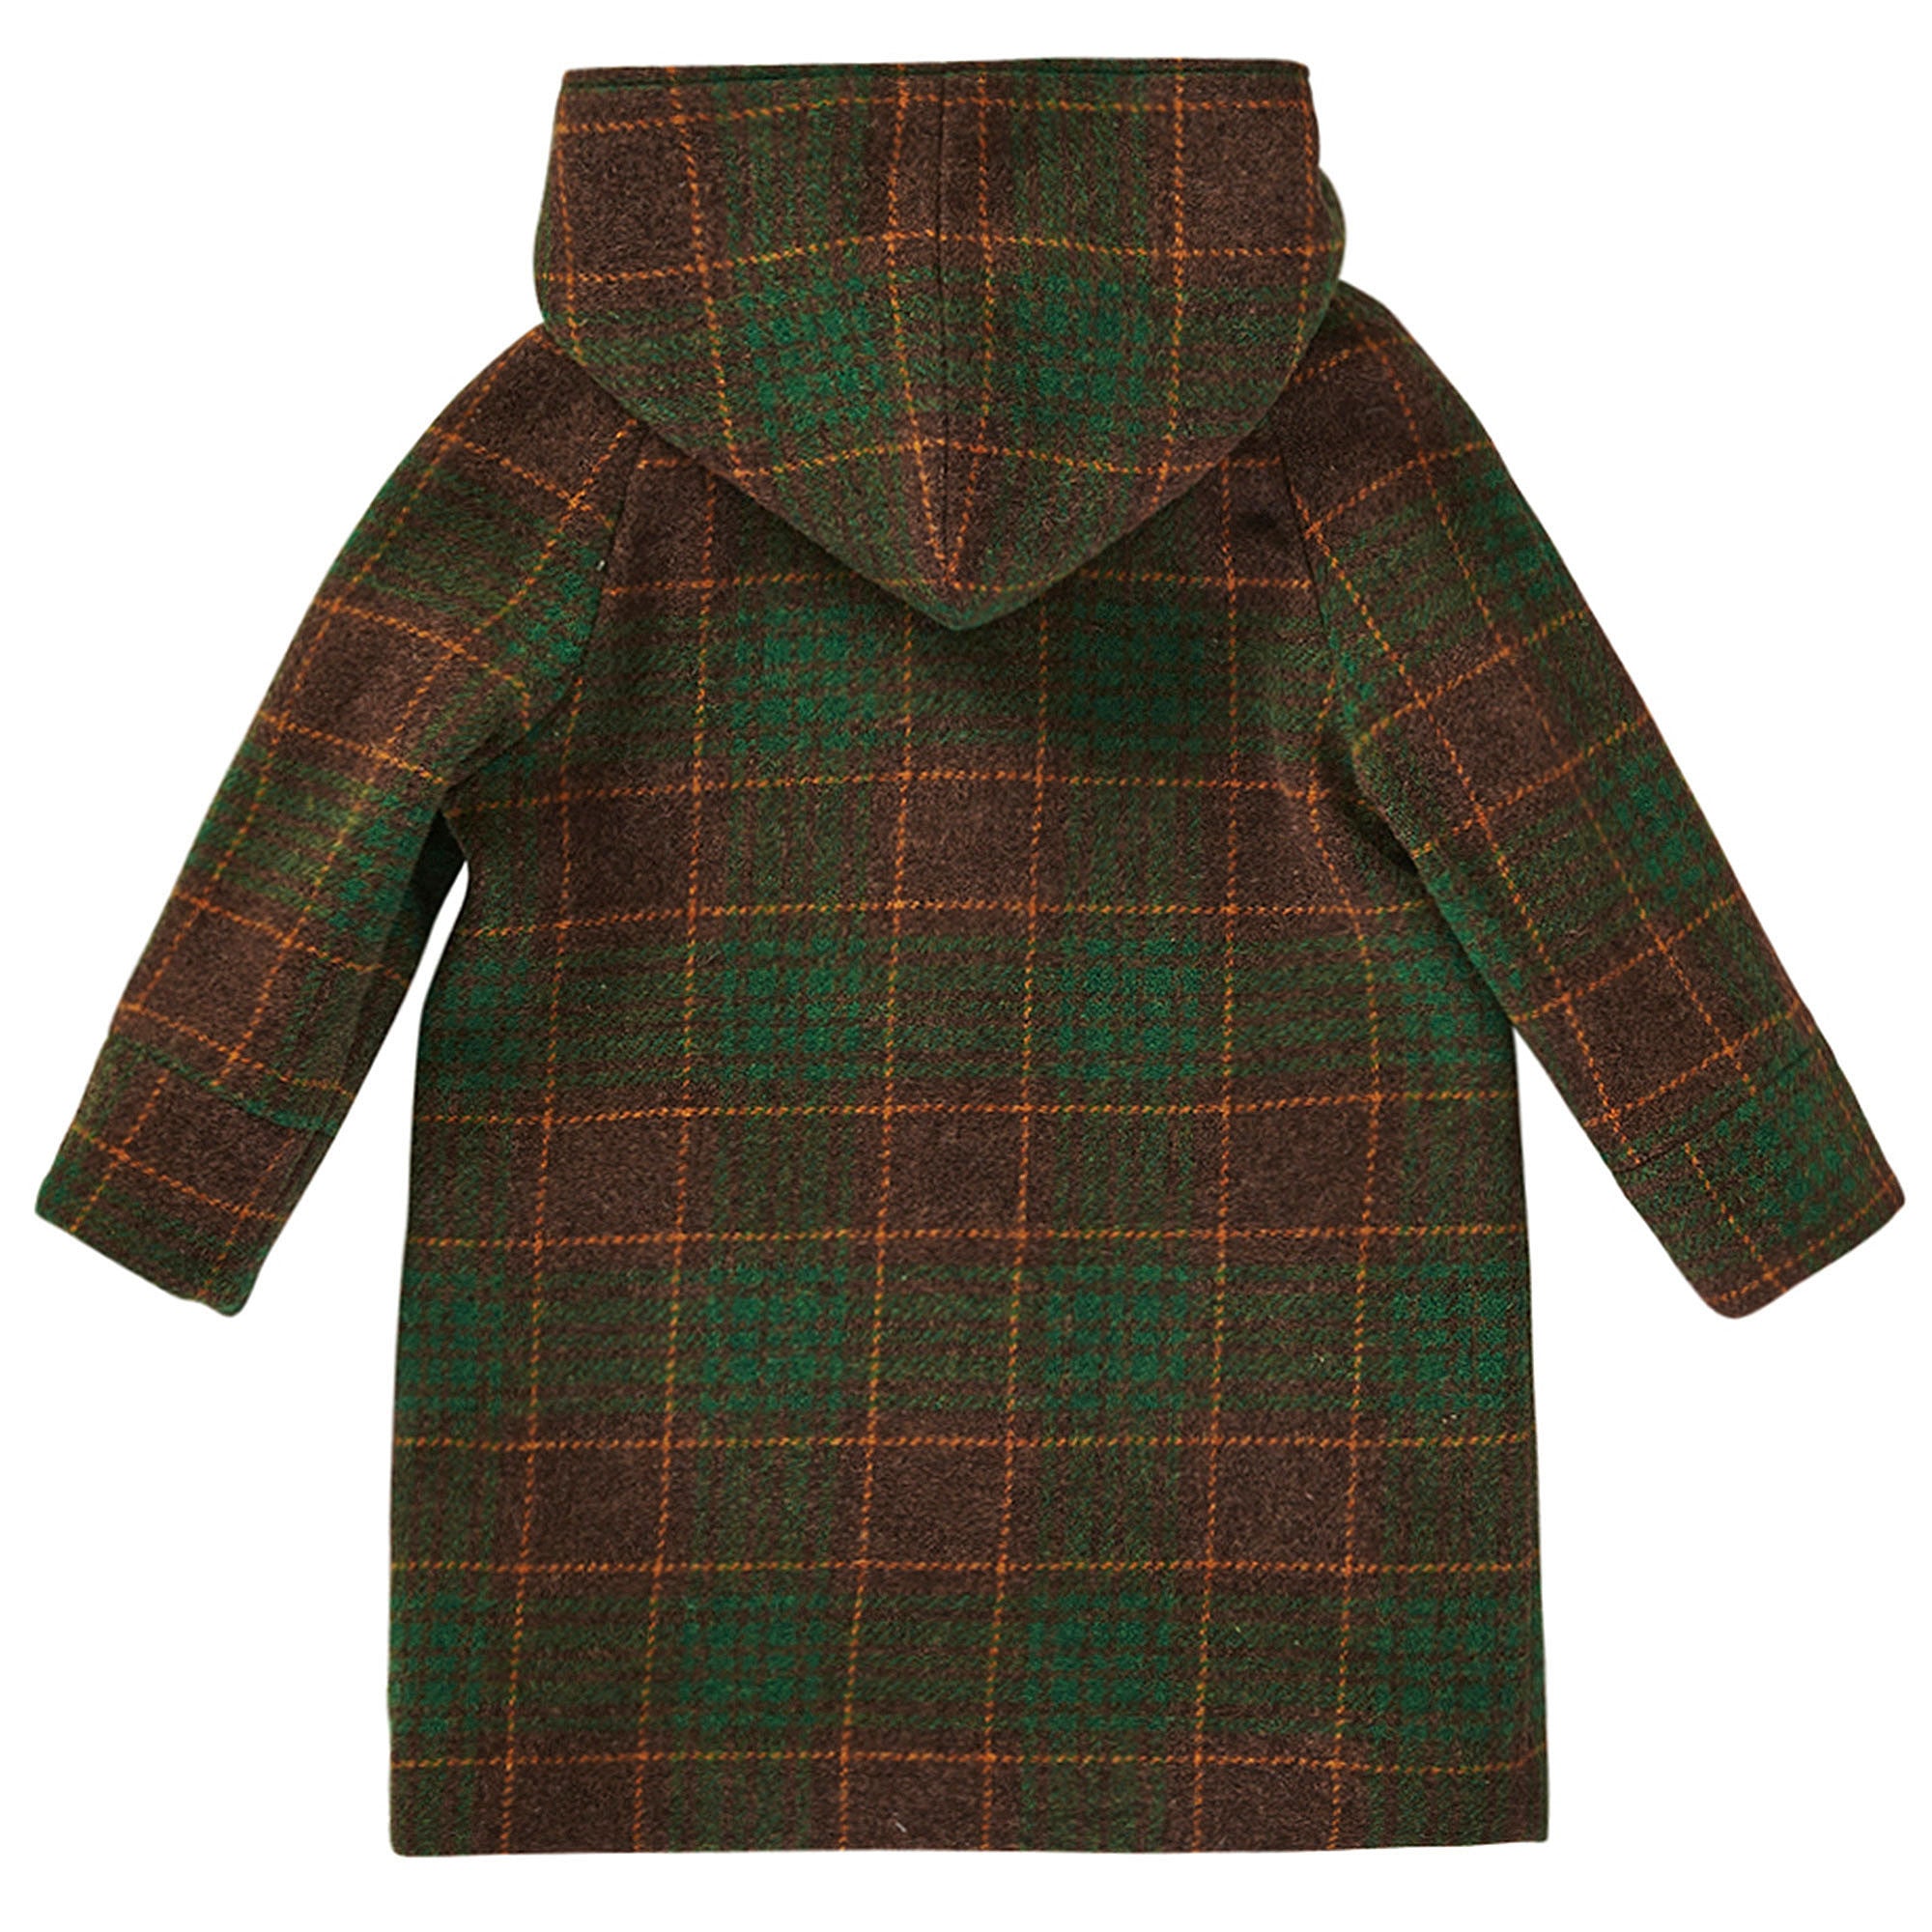 Girls Green & Red Check Hooded Wool Coat - CÉMAROSE | Children's Fashion Store - 2